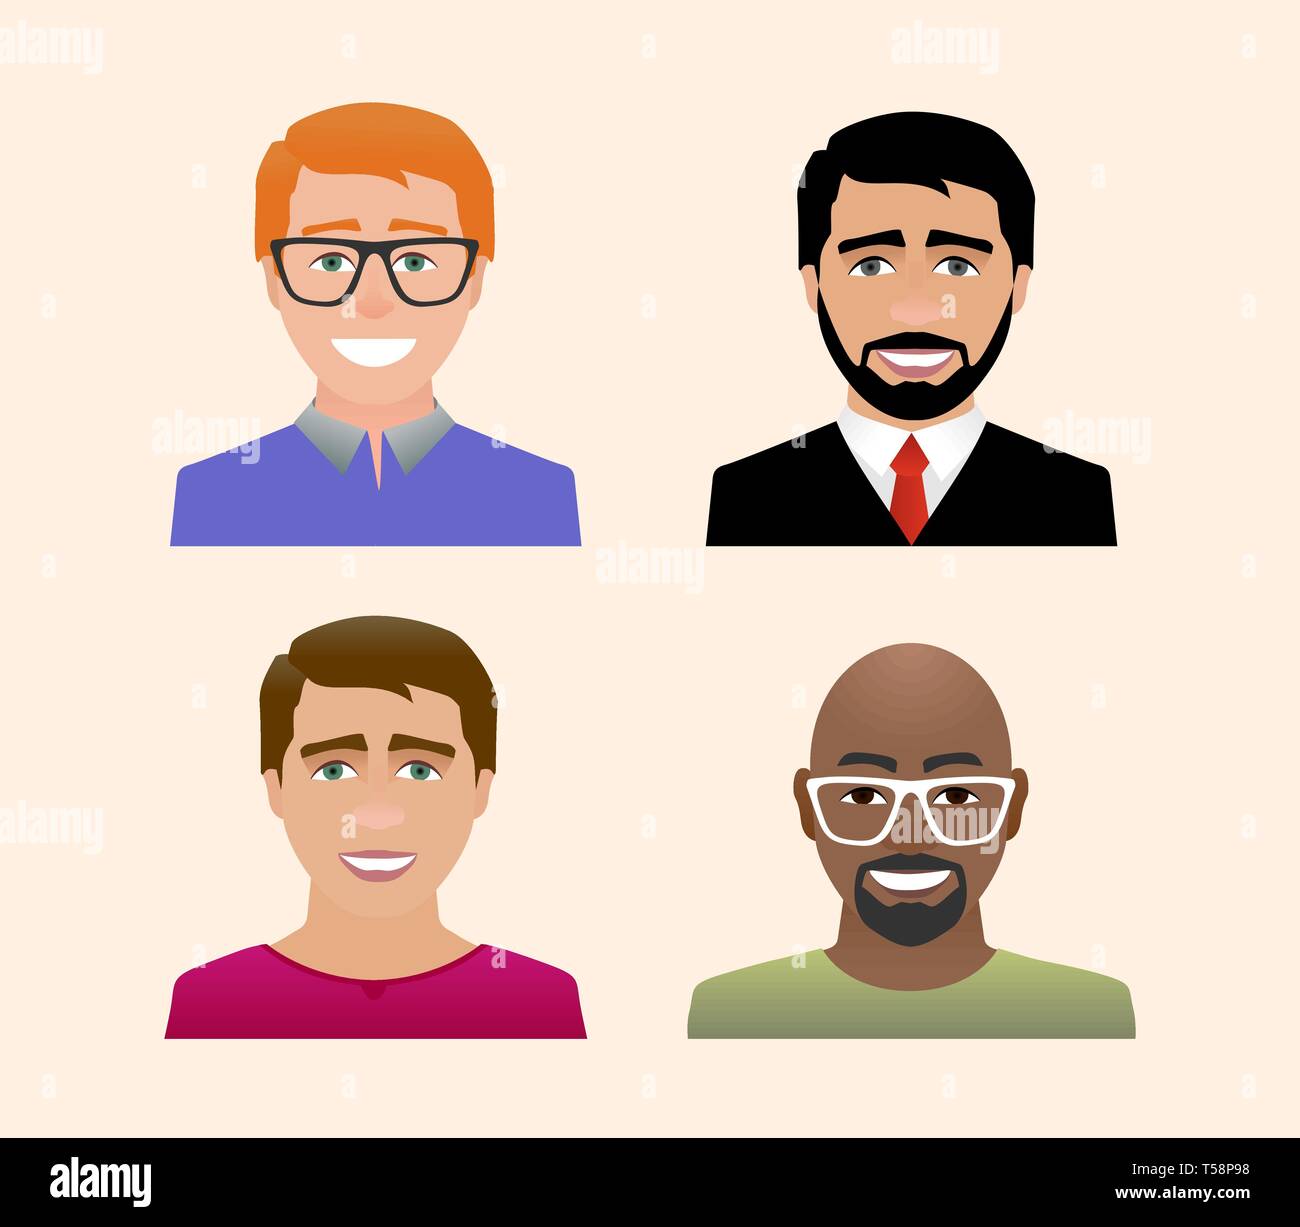 Characters avatars profile in flat cartoon style color illustration. Stock Vector